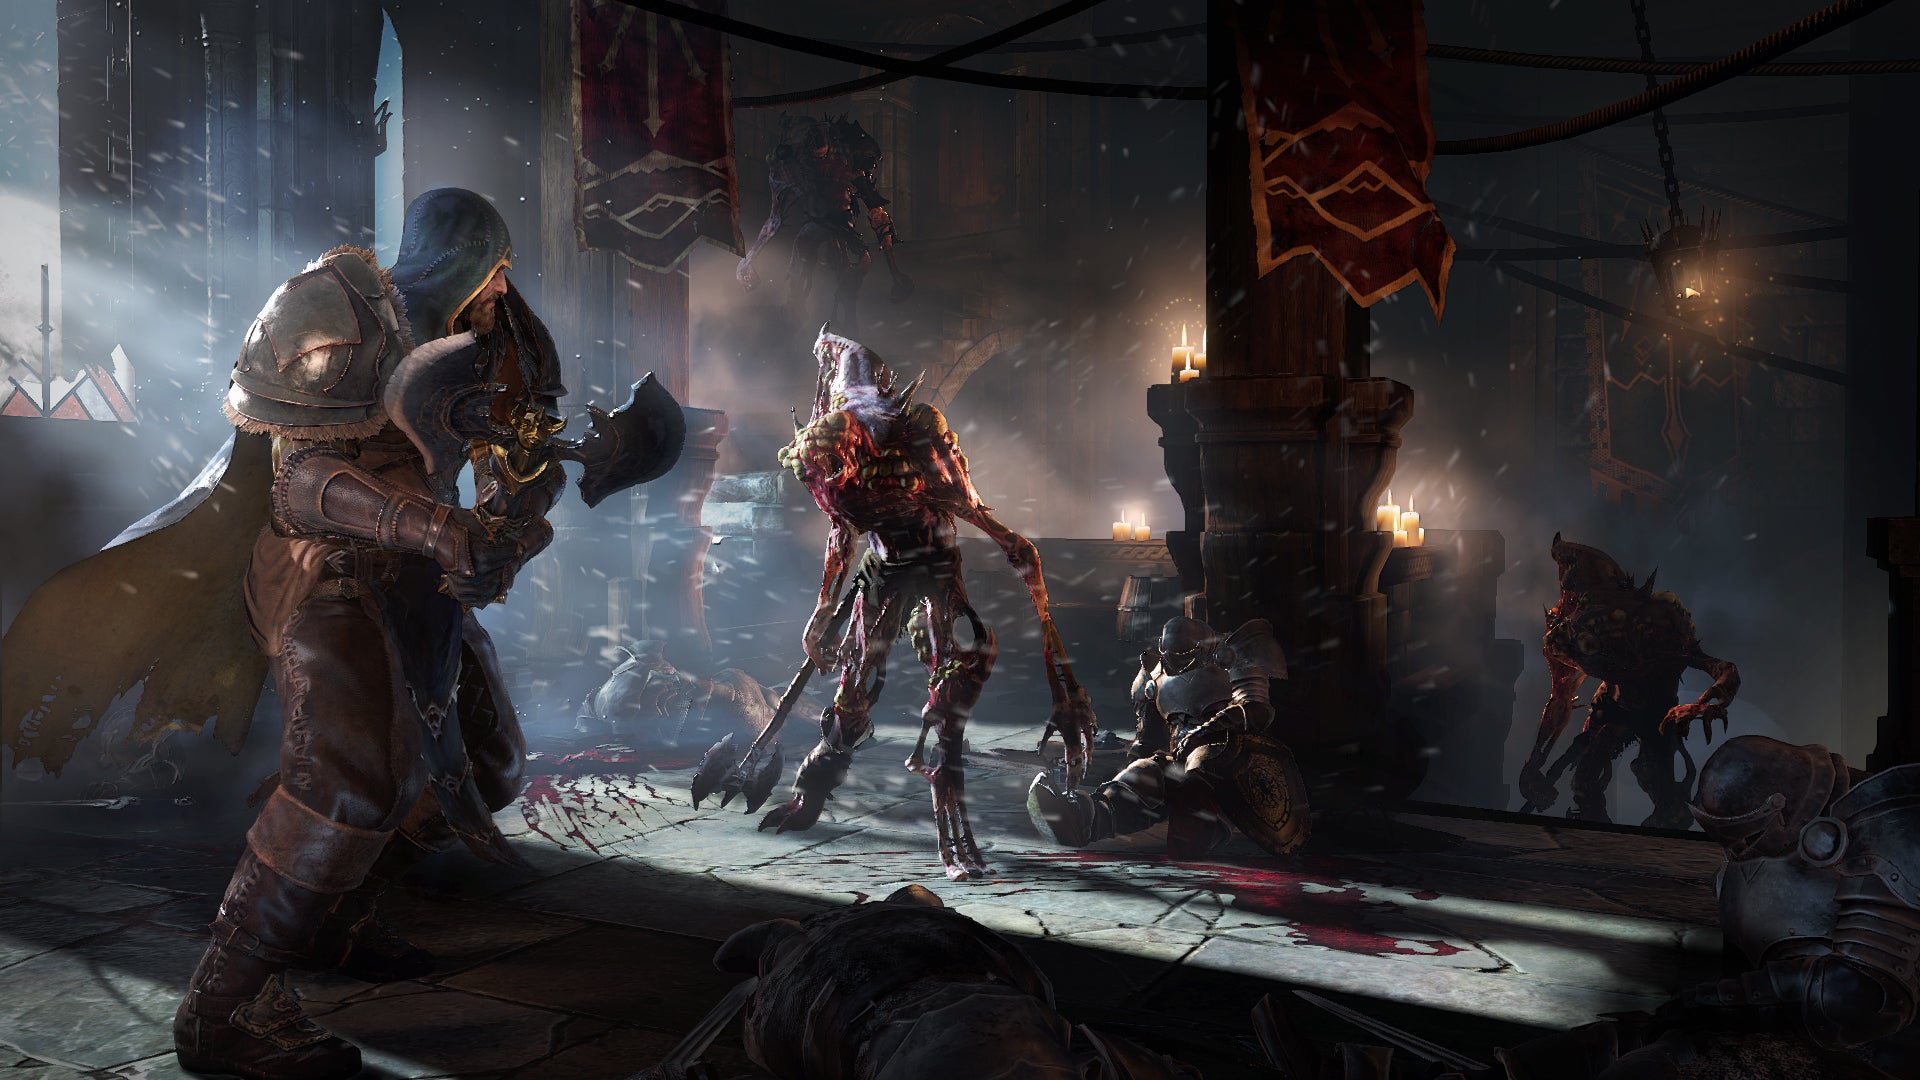 Lords of the Fallen - HF Games